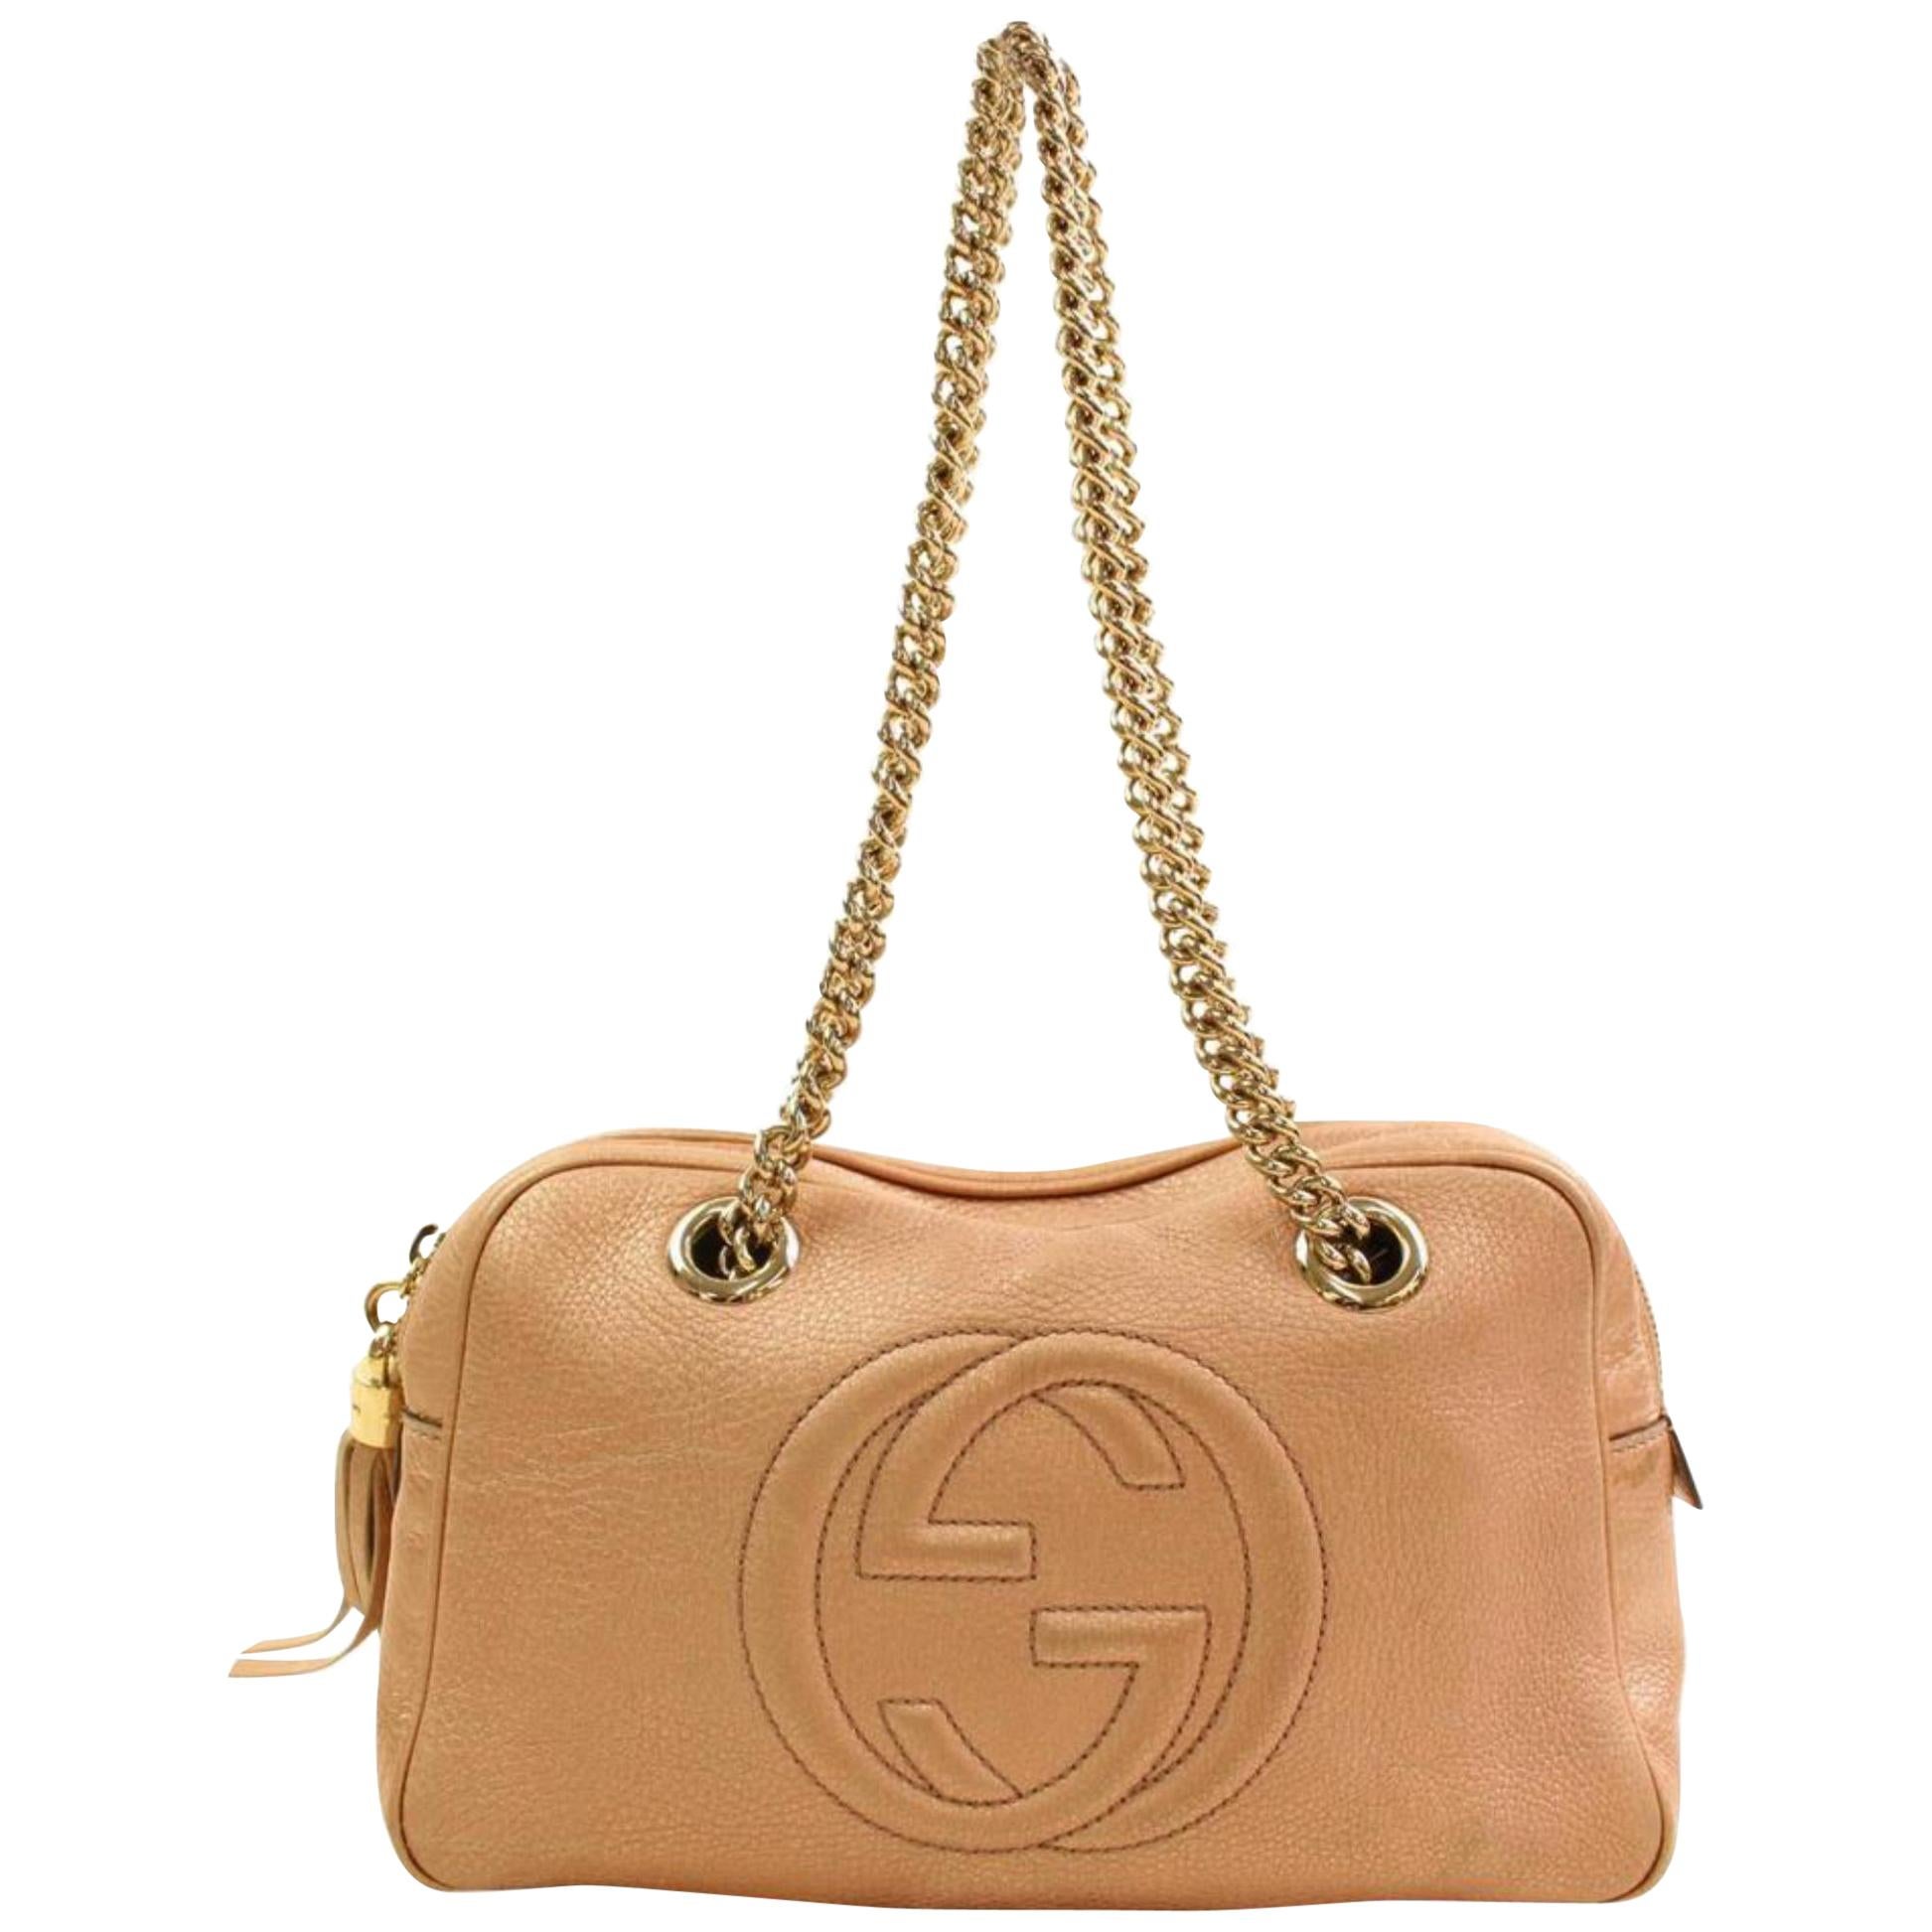 Gucci Soho Dark Rare Chain Camera 866570 Pink Patent Leather Shoulder Bag For Sale